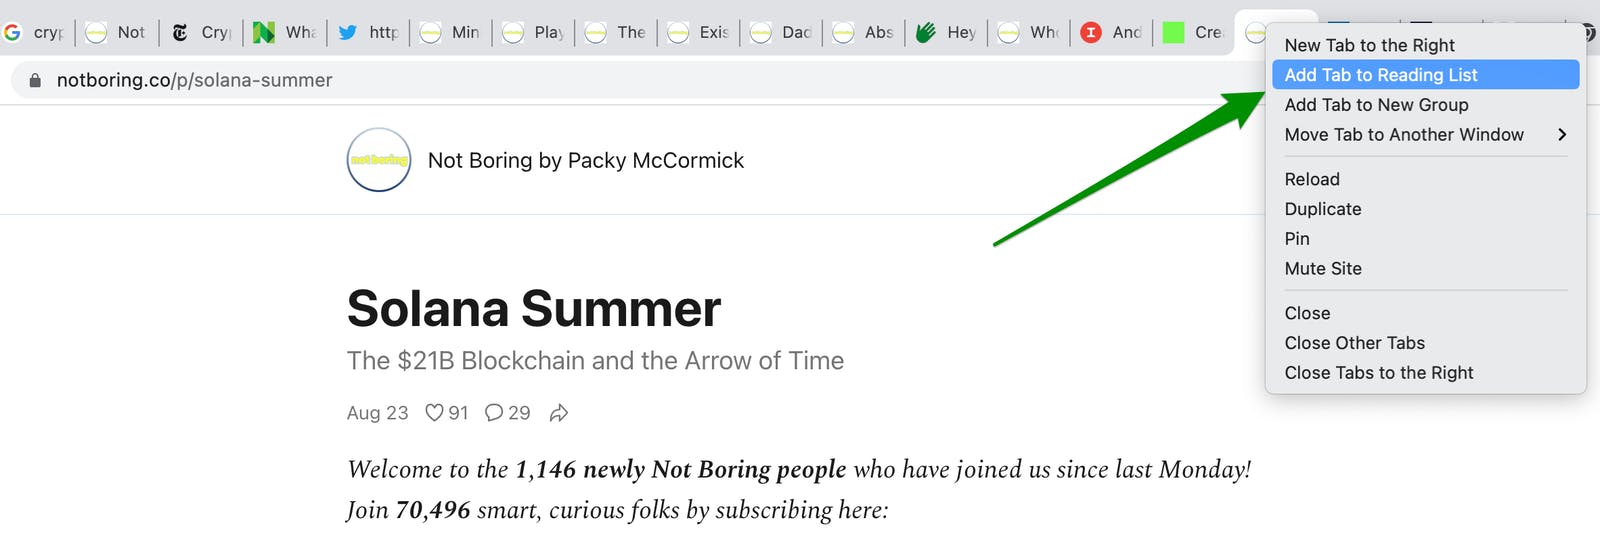 Browser window with multiple tabs, green arrow pointing to "add tab to reading list" button